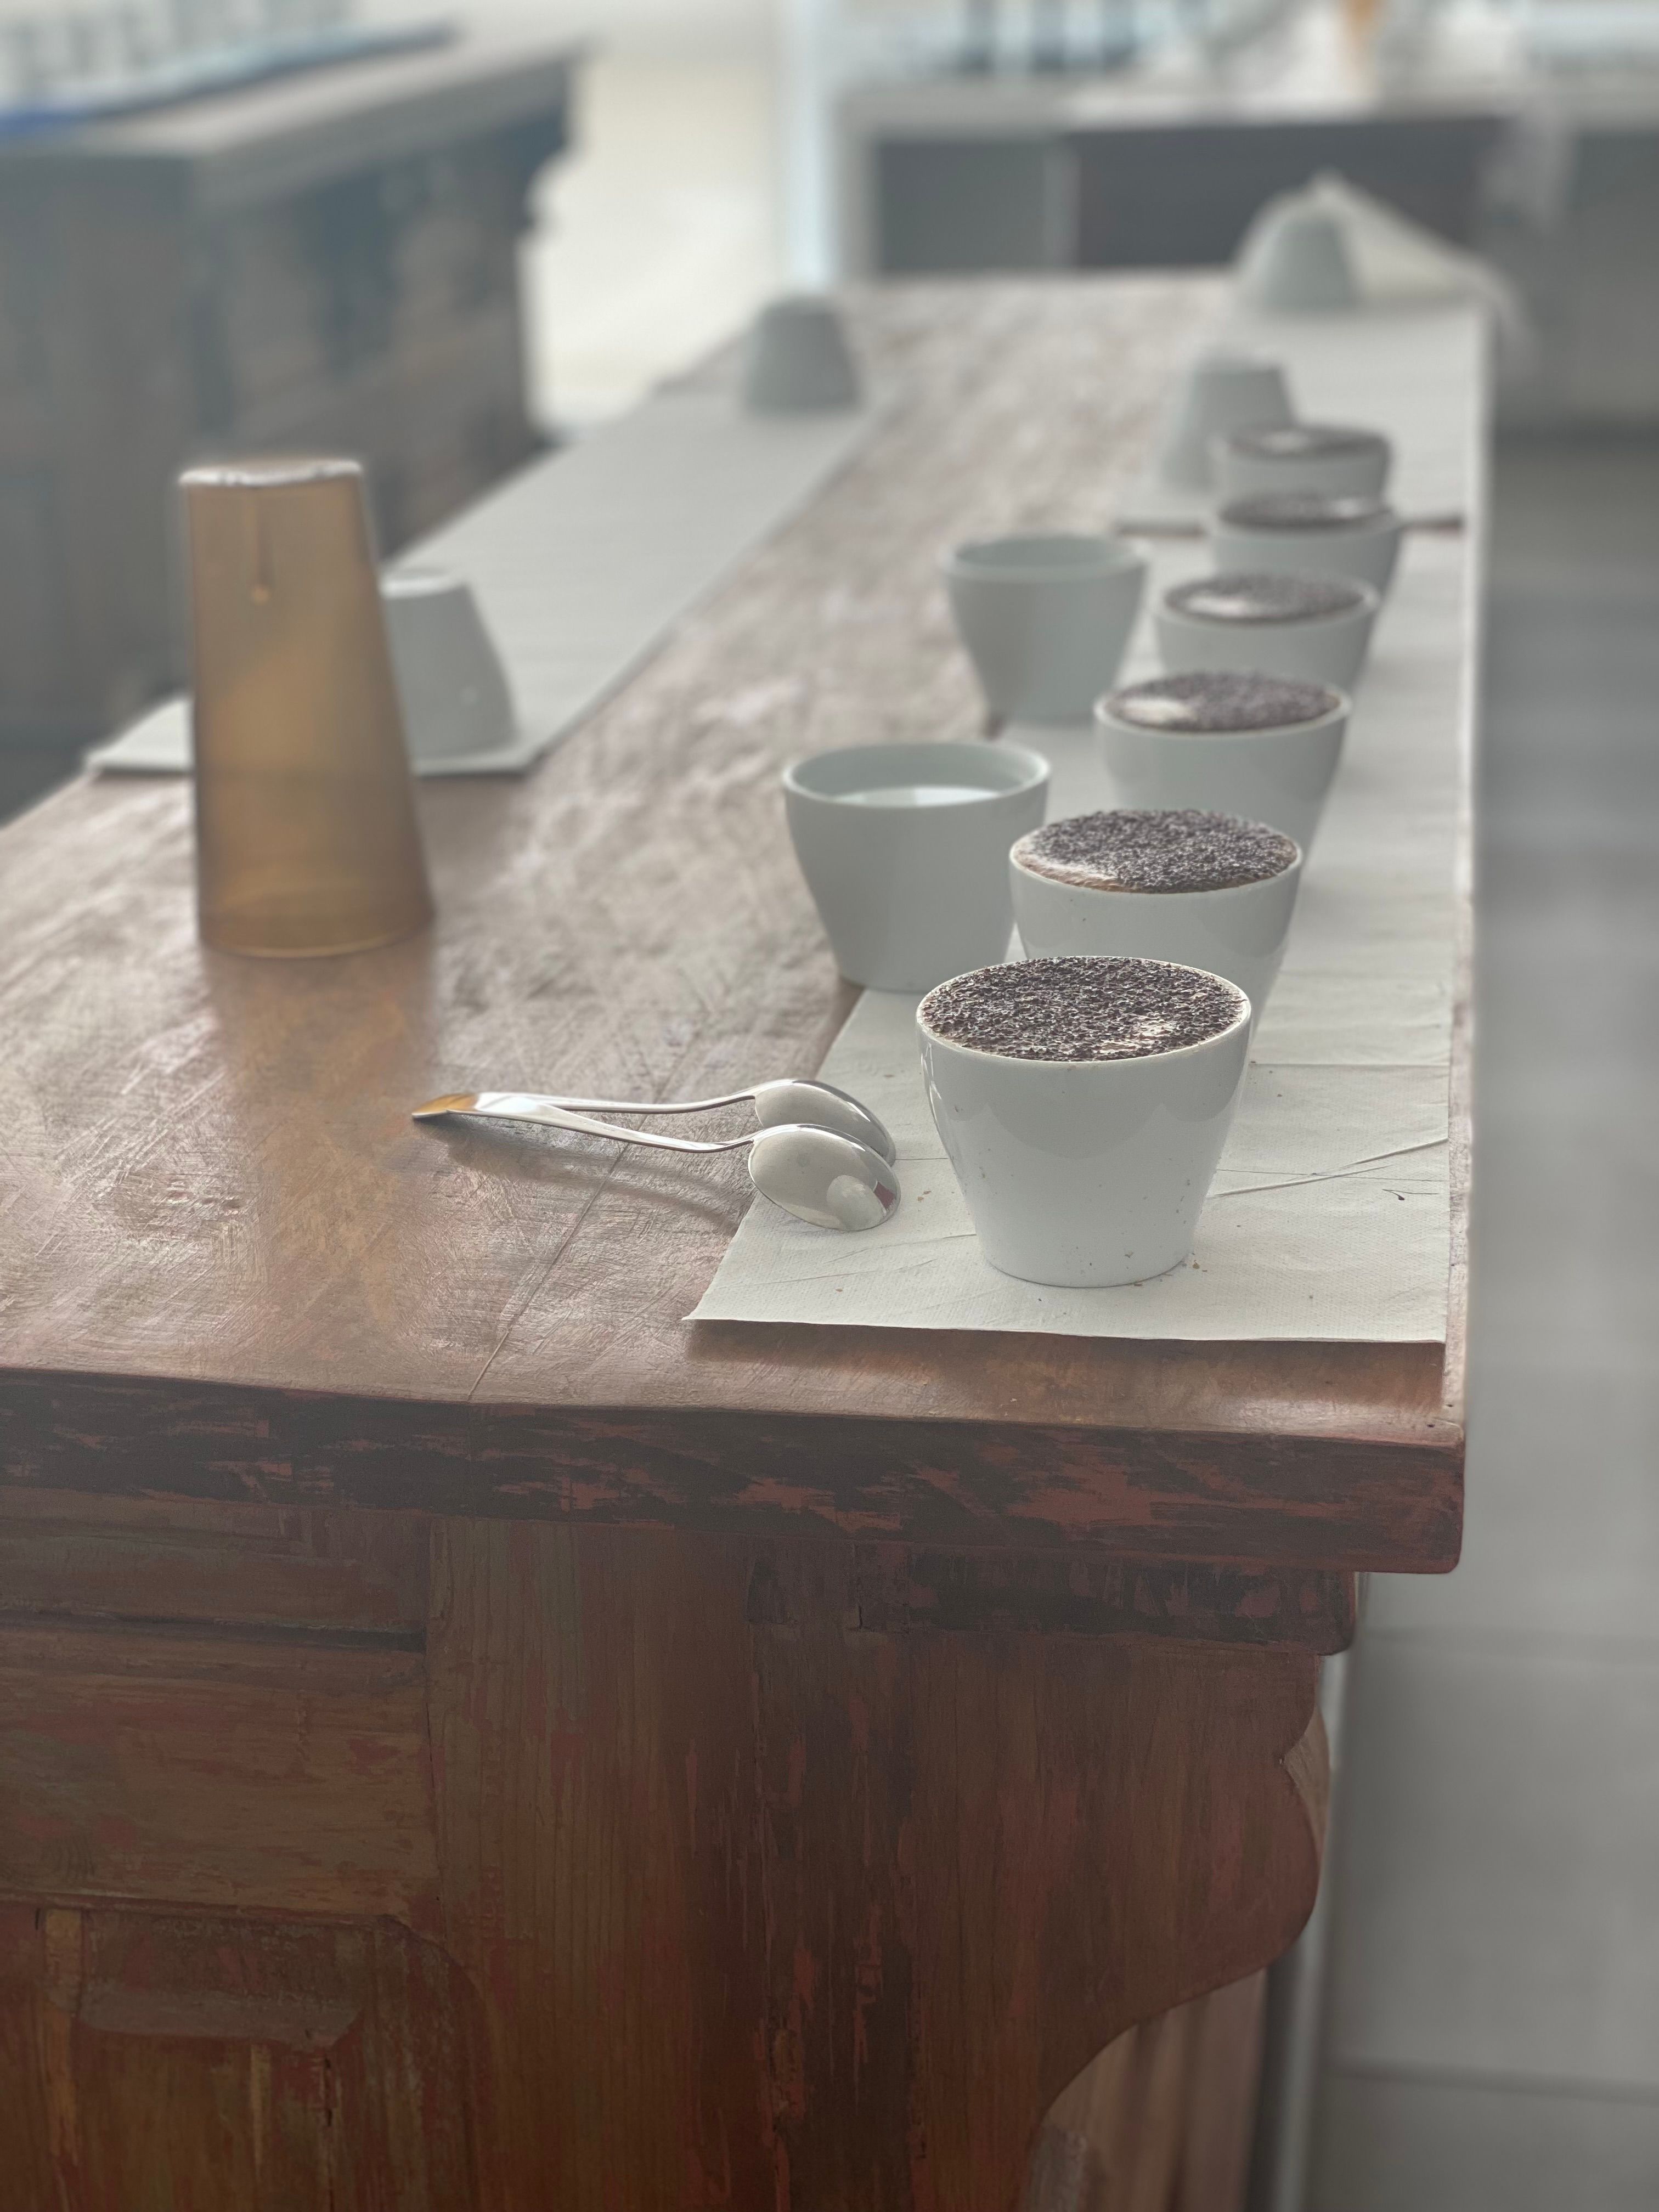 A cupping setup, with cups filled with coffee